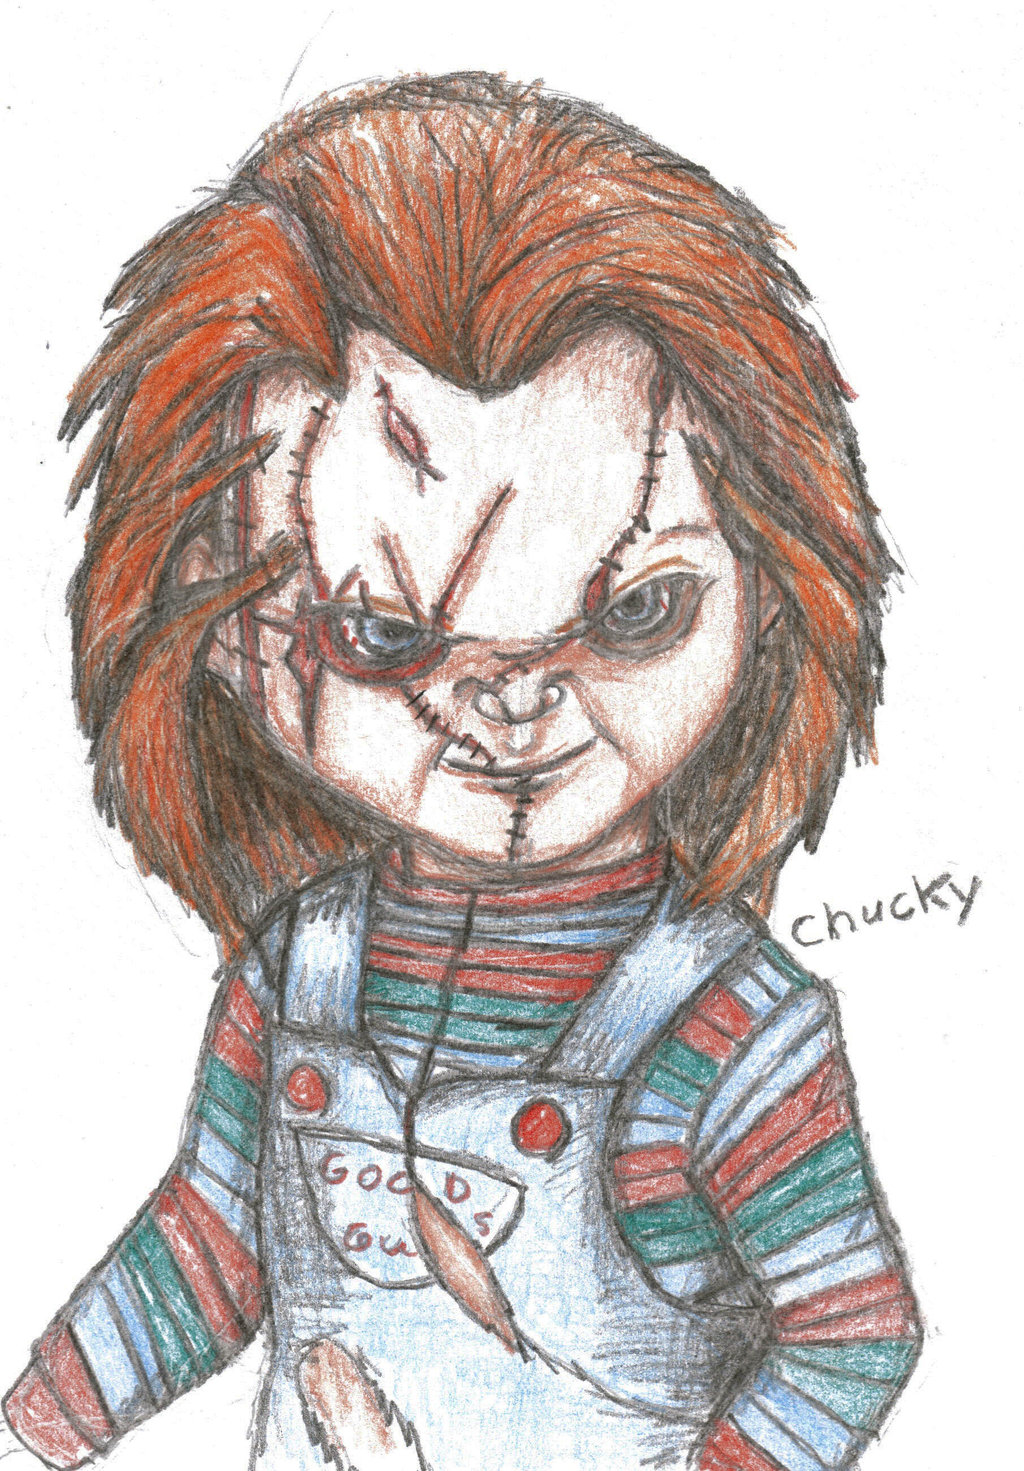 clipart of chucky - Clipground